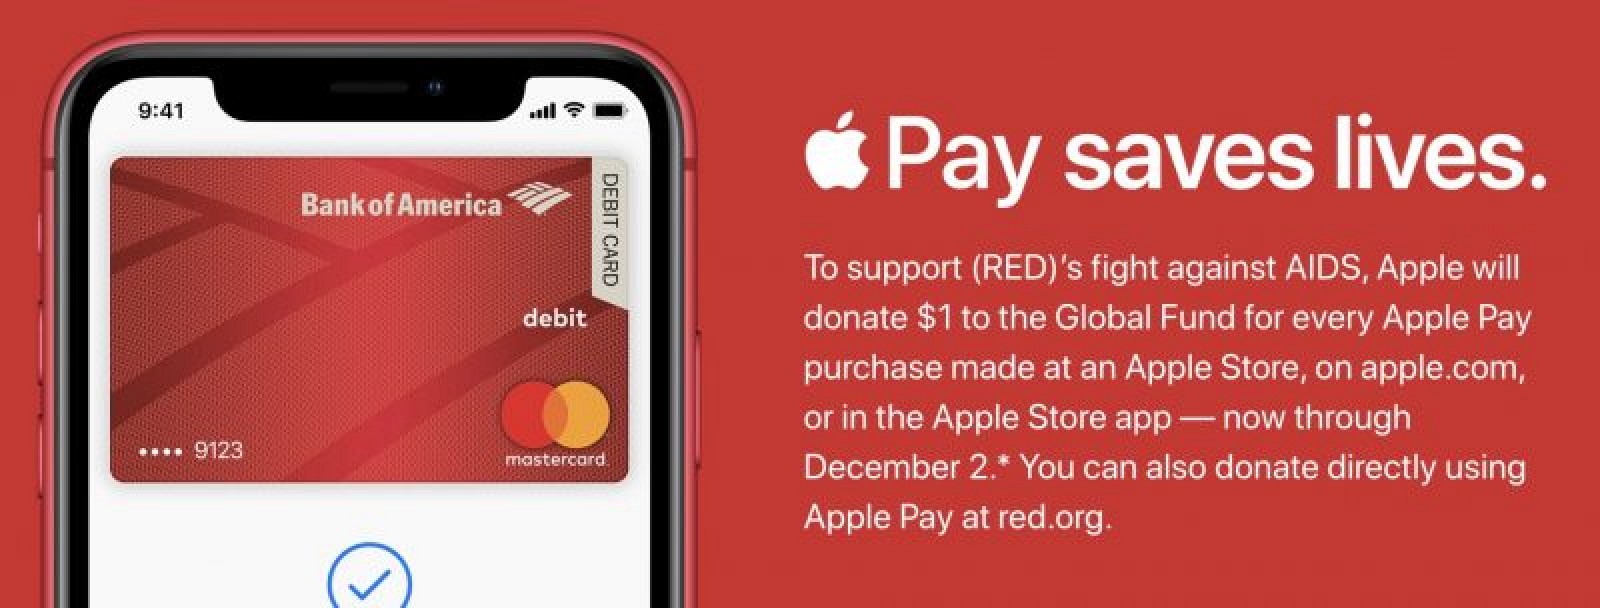 article-new/2019/11/apple-pay-red-donations-2019-800x304.jpg?retina